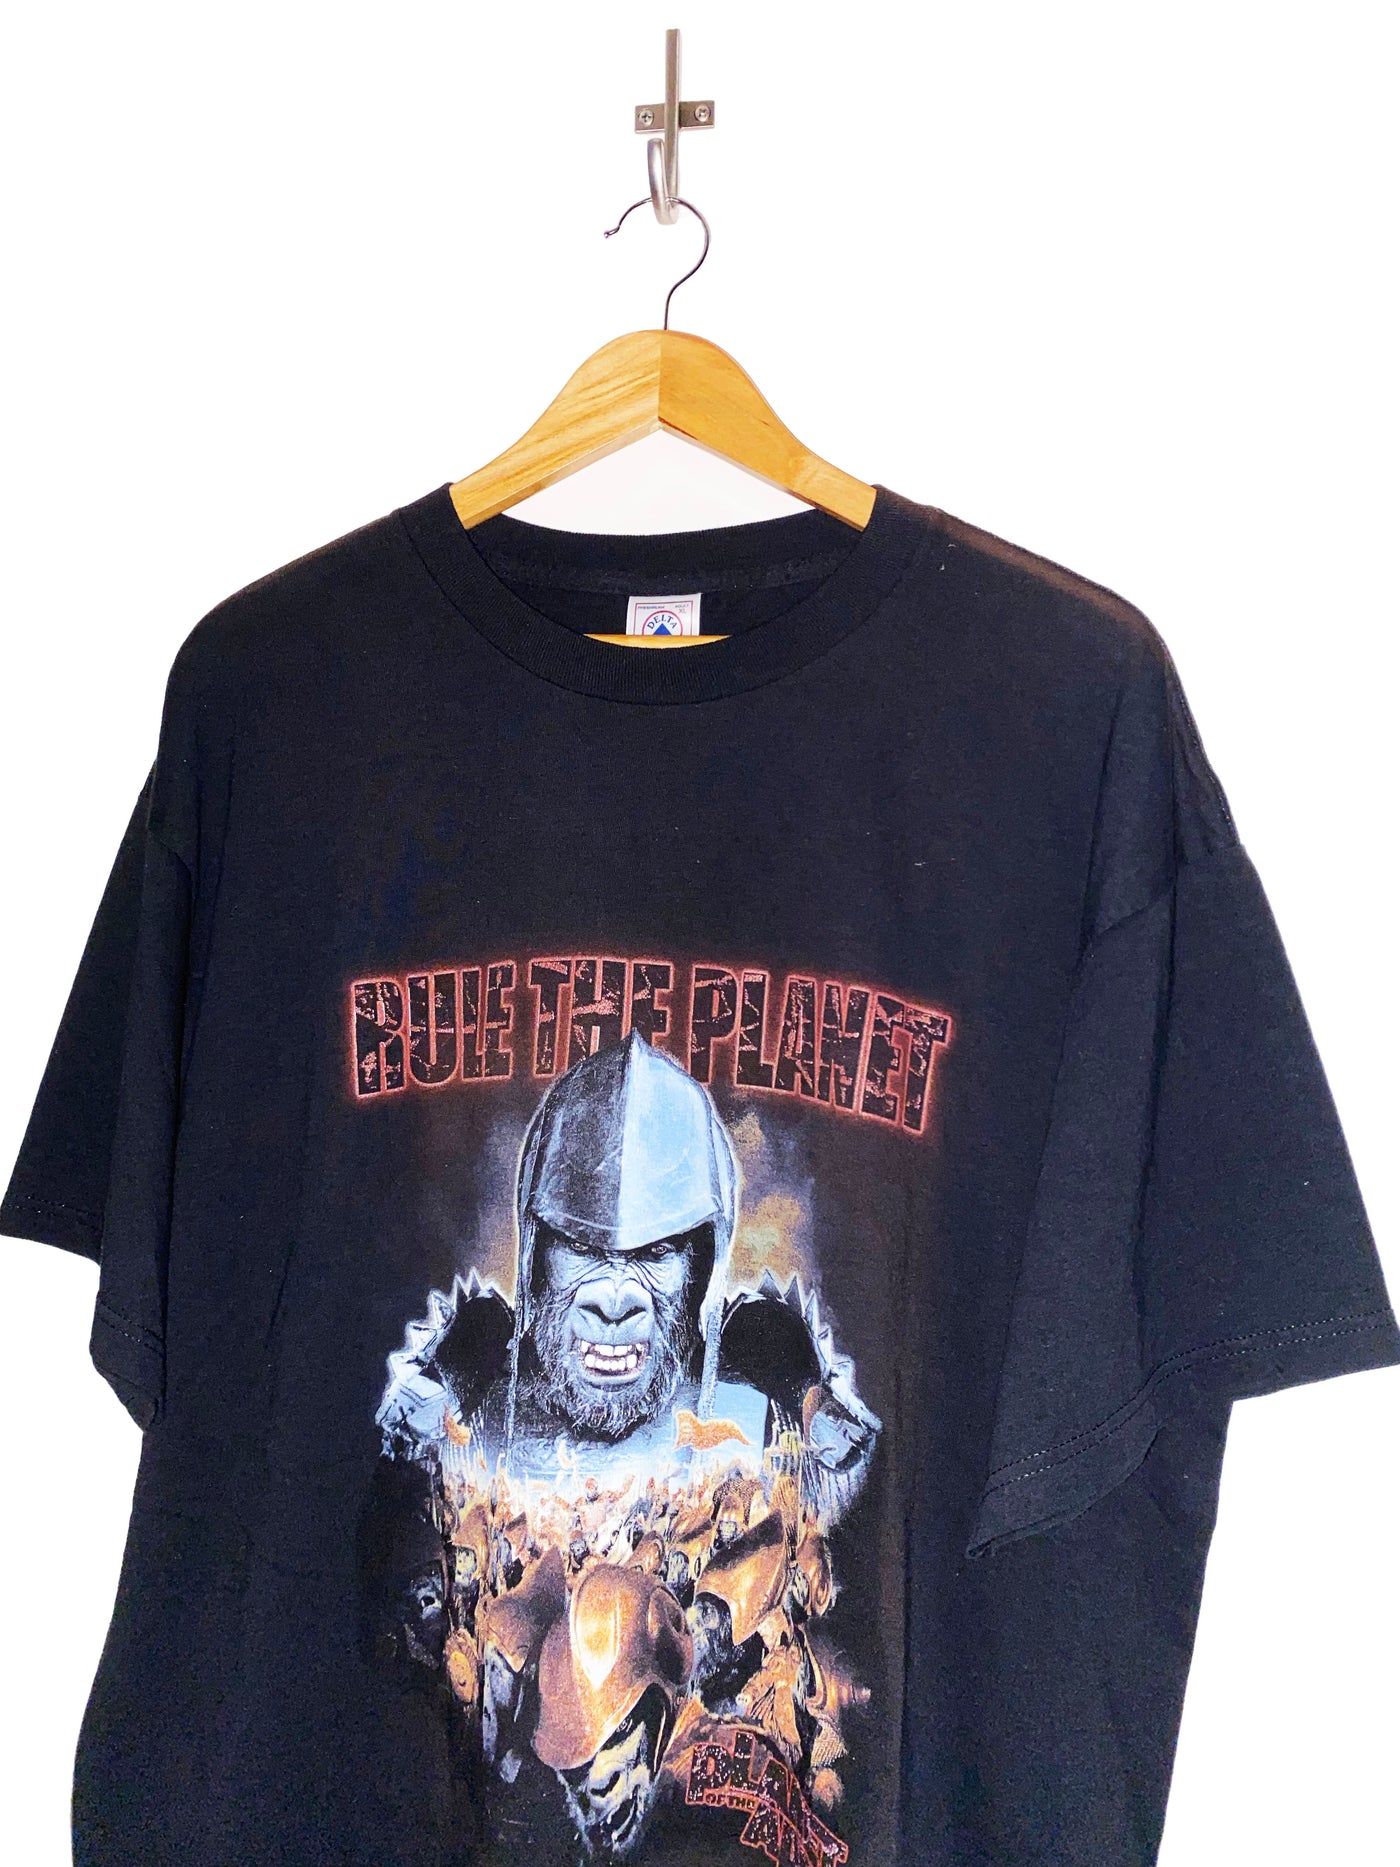 Vintage Planet of the Apes ‘Rule the Planet’ Promo T-Shirt